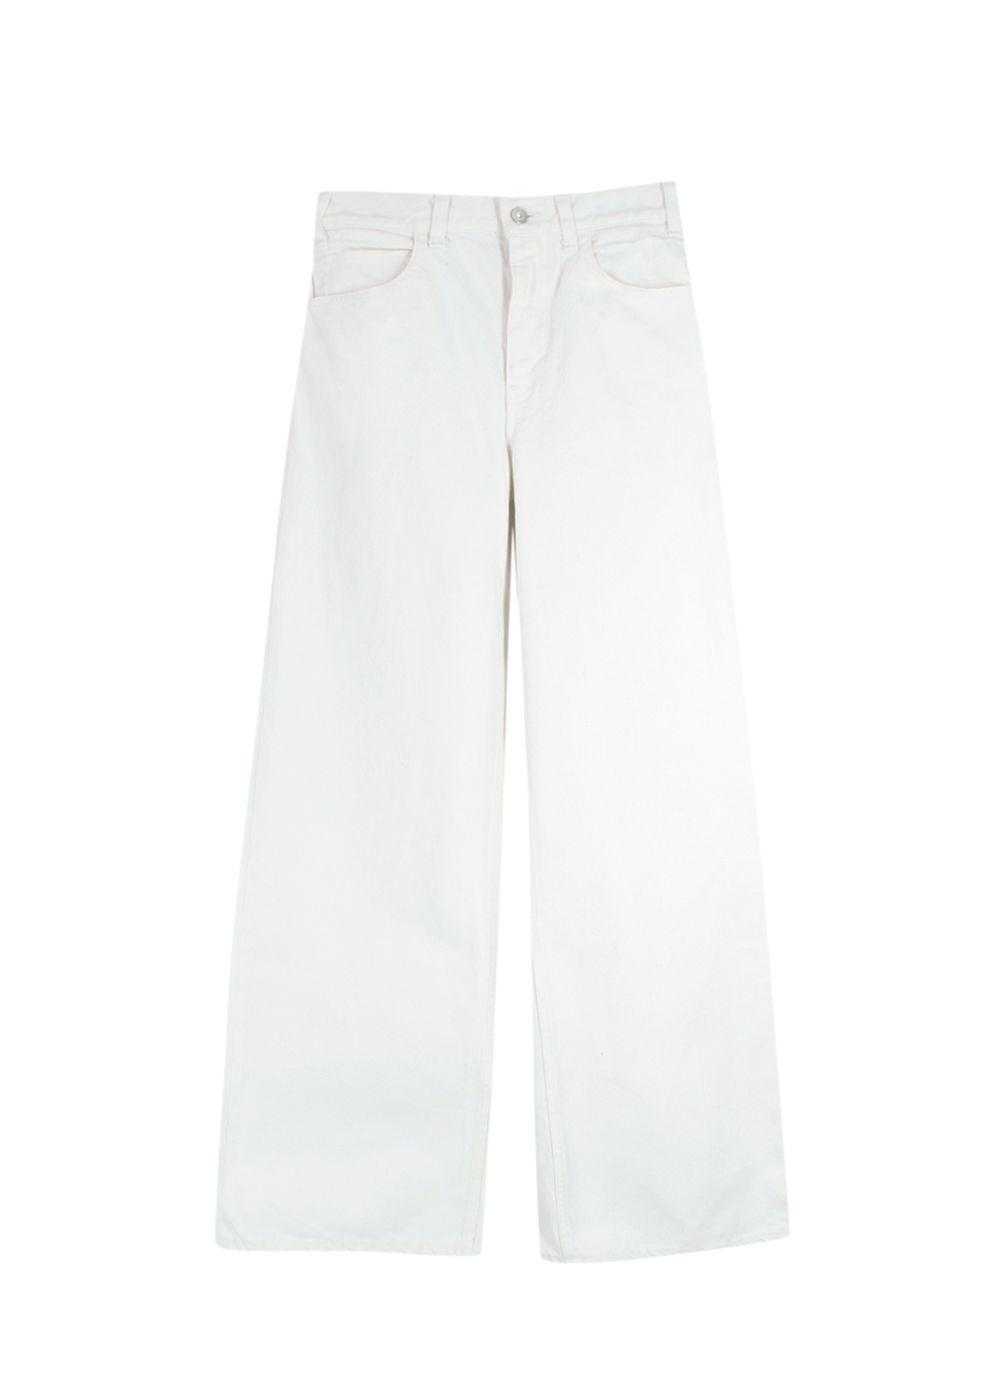 Managed by hewi Celine White Wide Leg Jeans - image 1